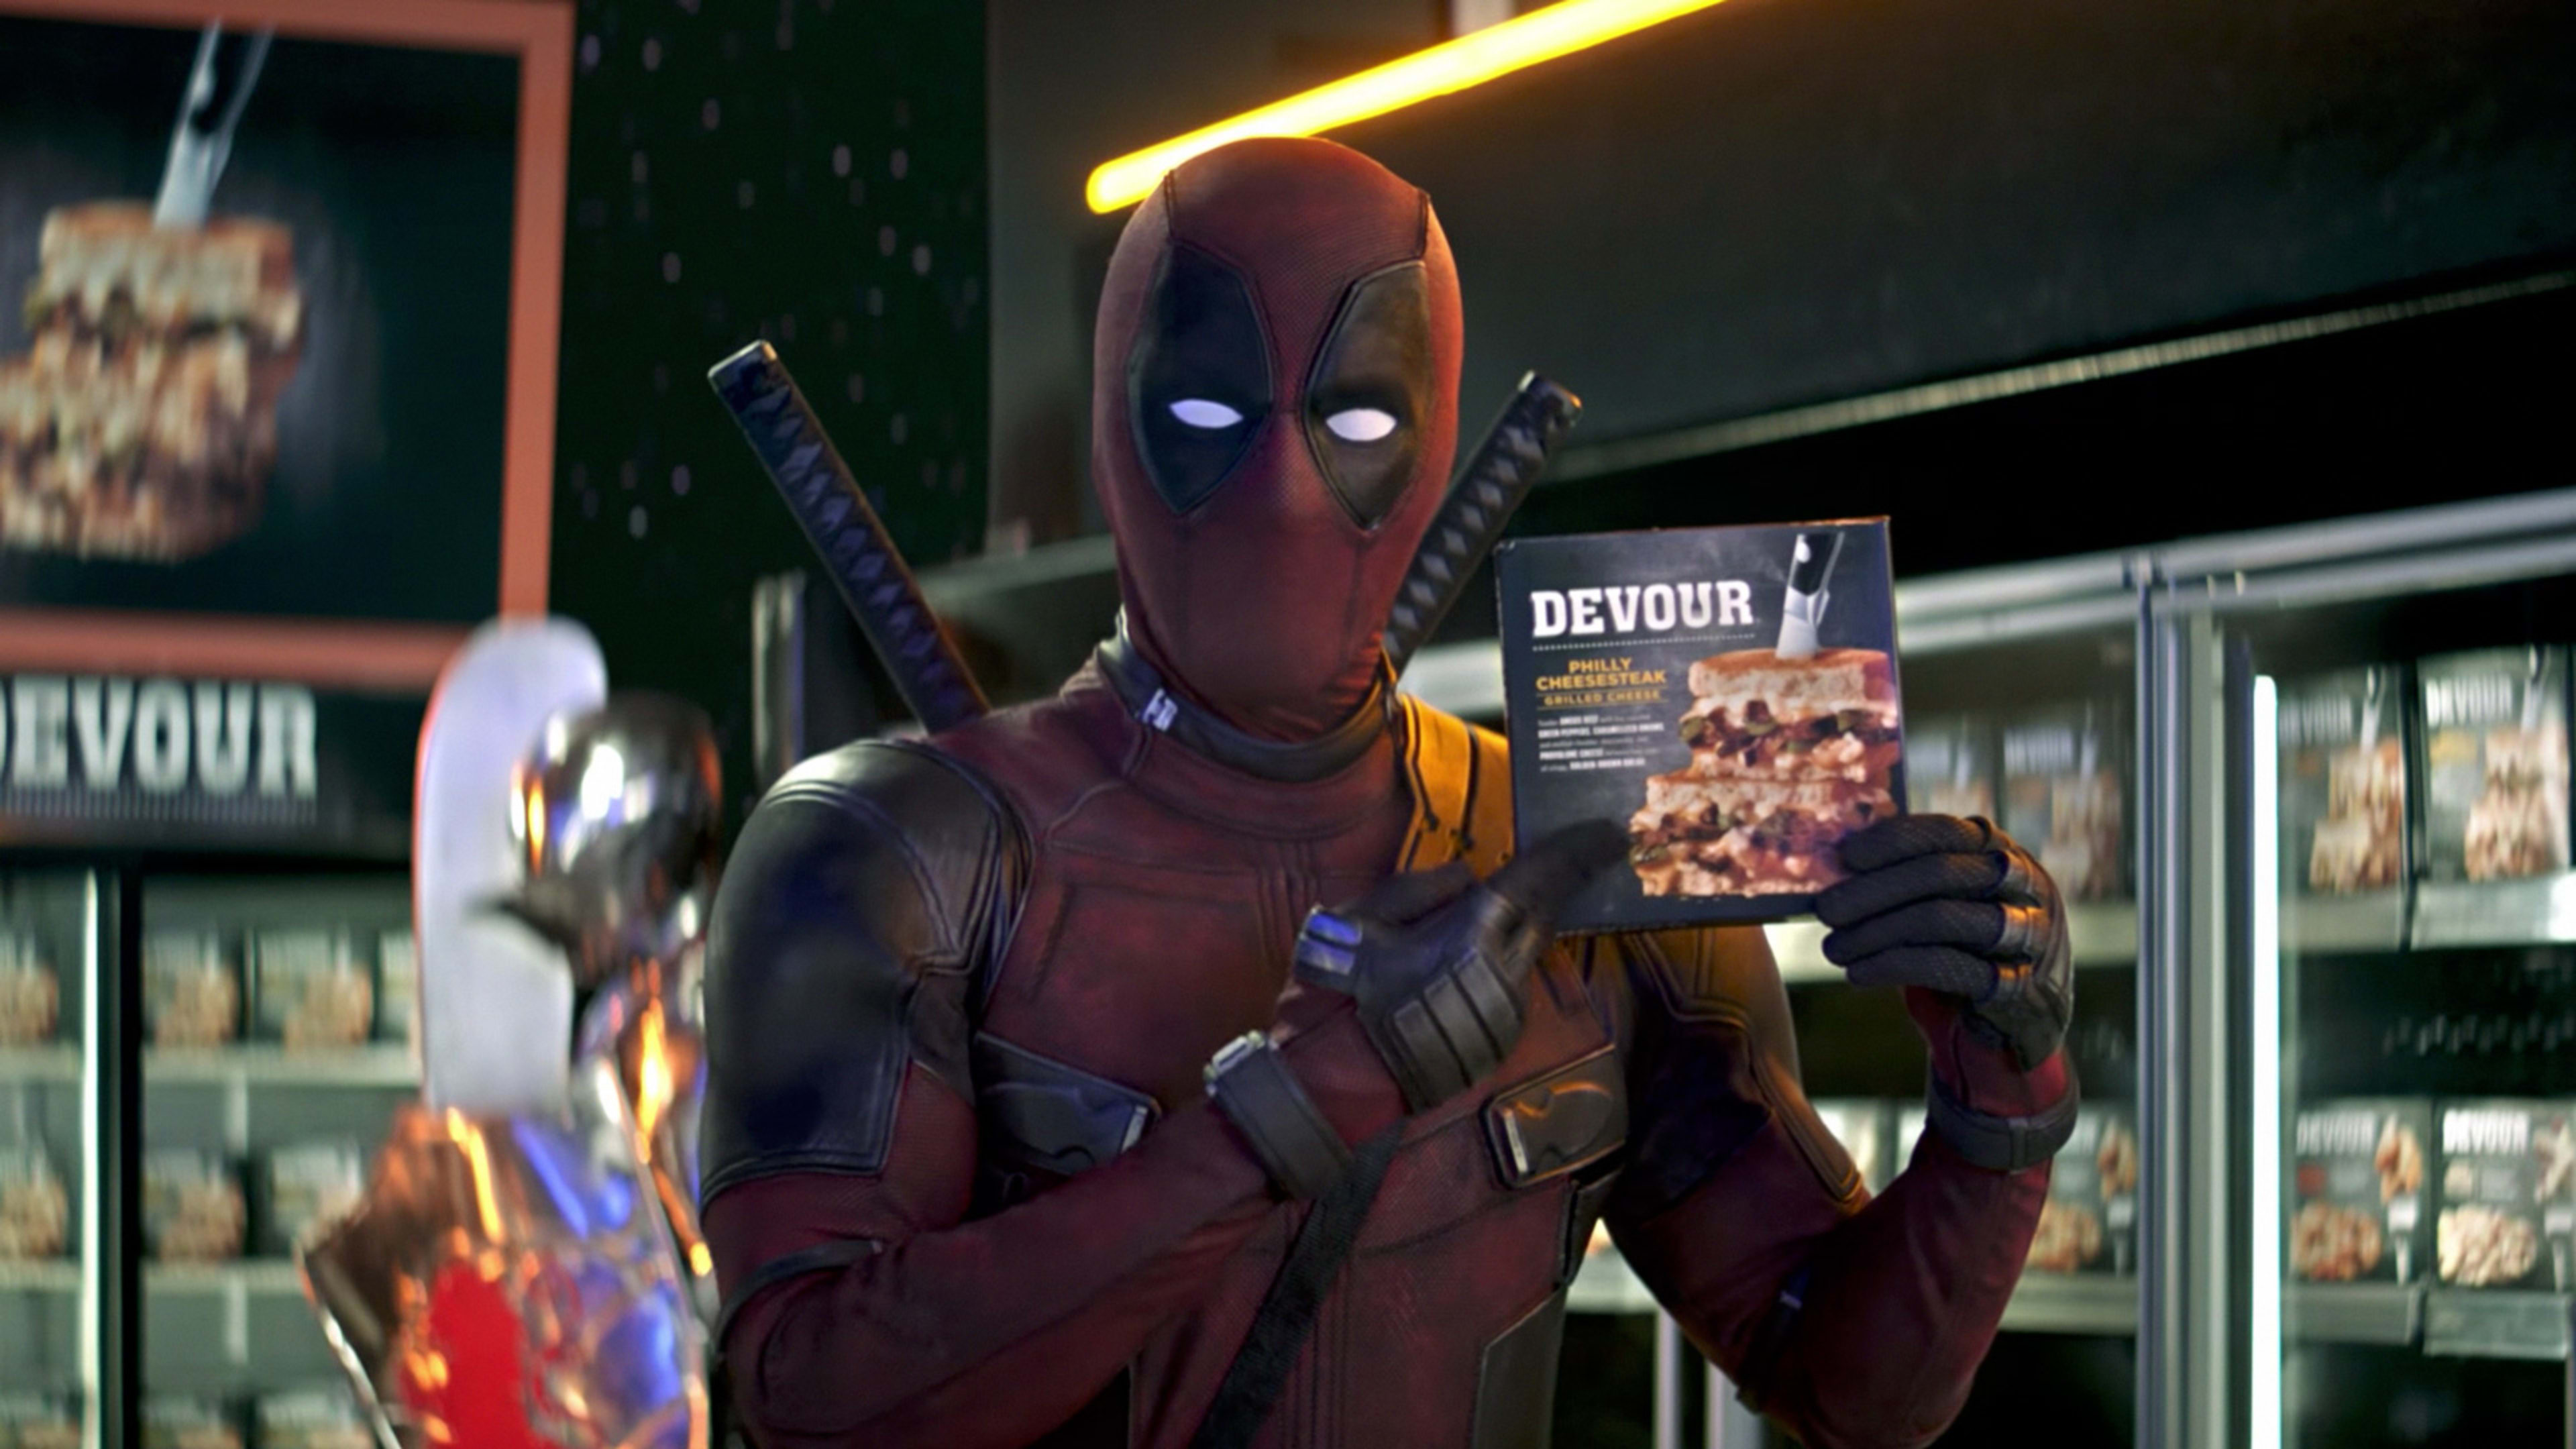 Deadpool Does Product Marketing In The Deadpooliest Way Possible